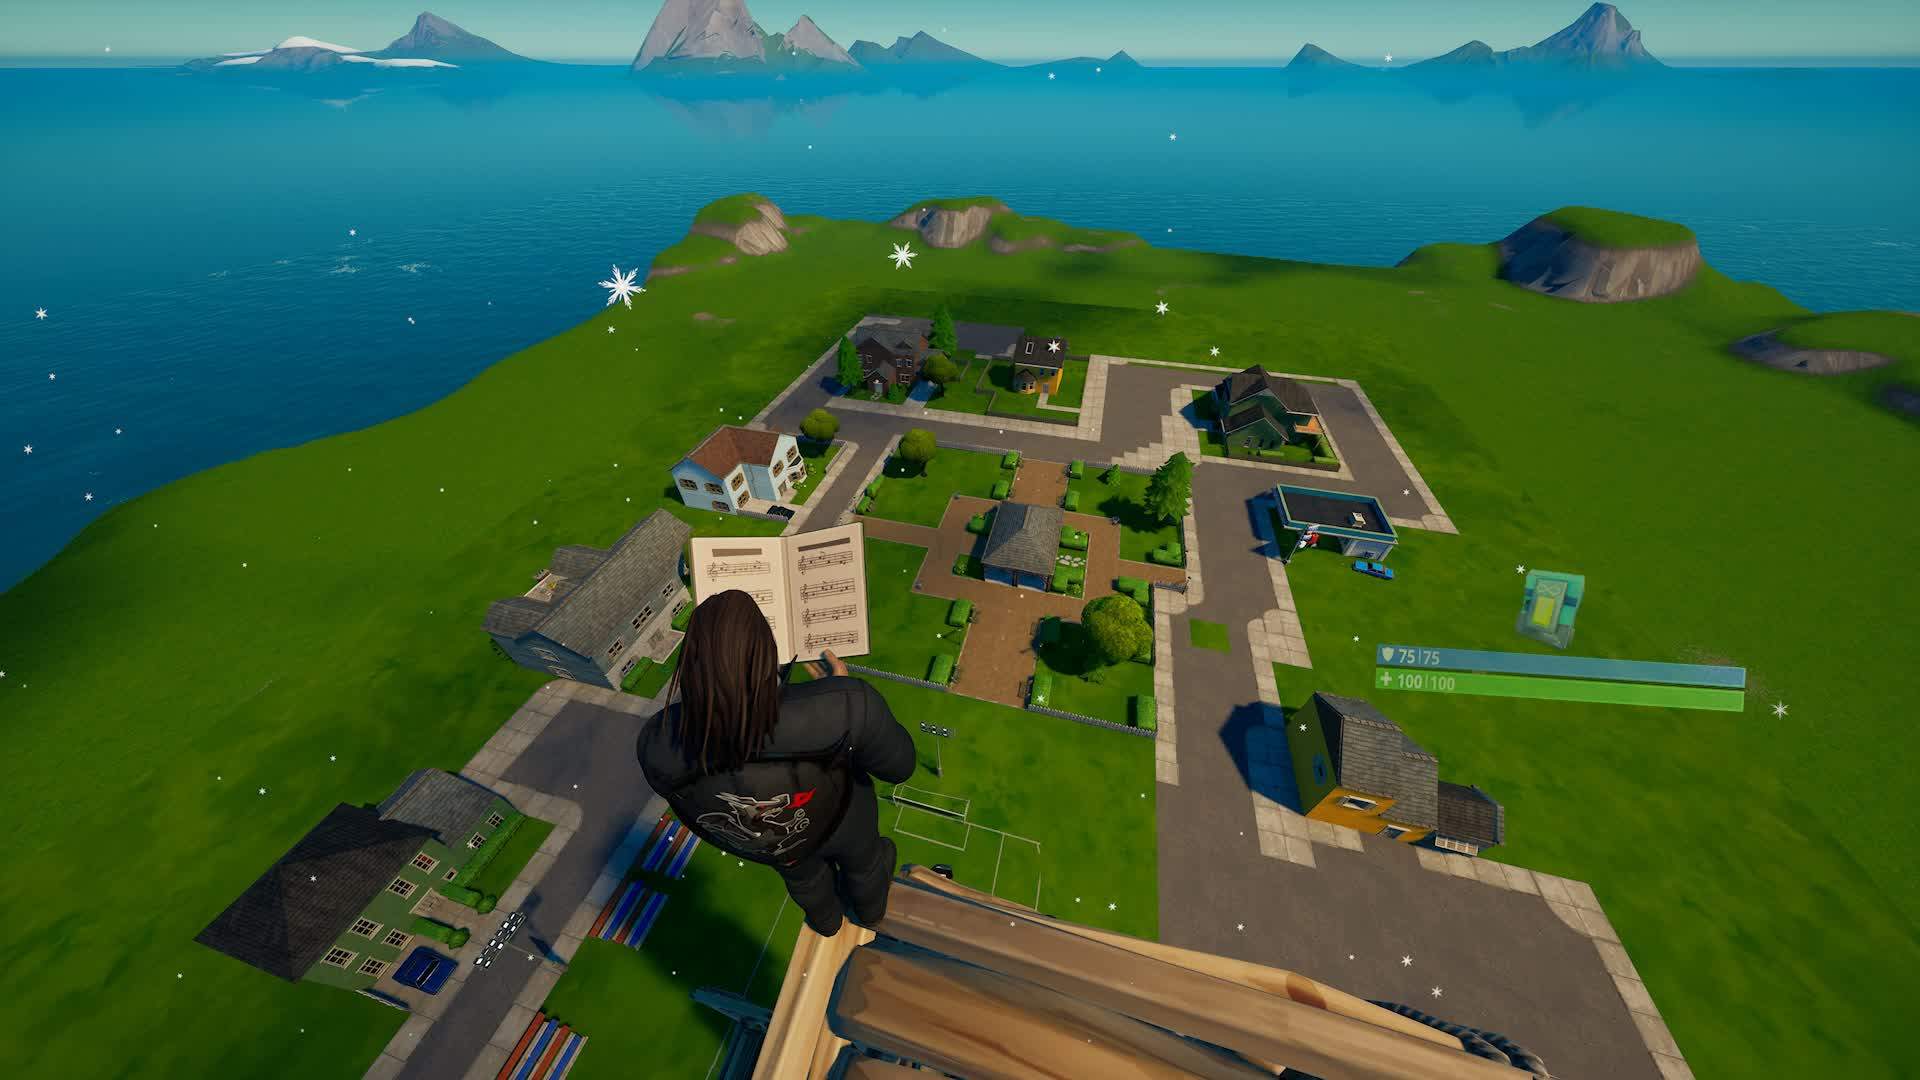 Pleasant park free for all